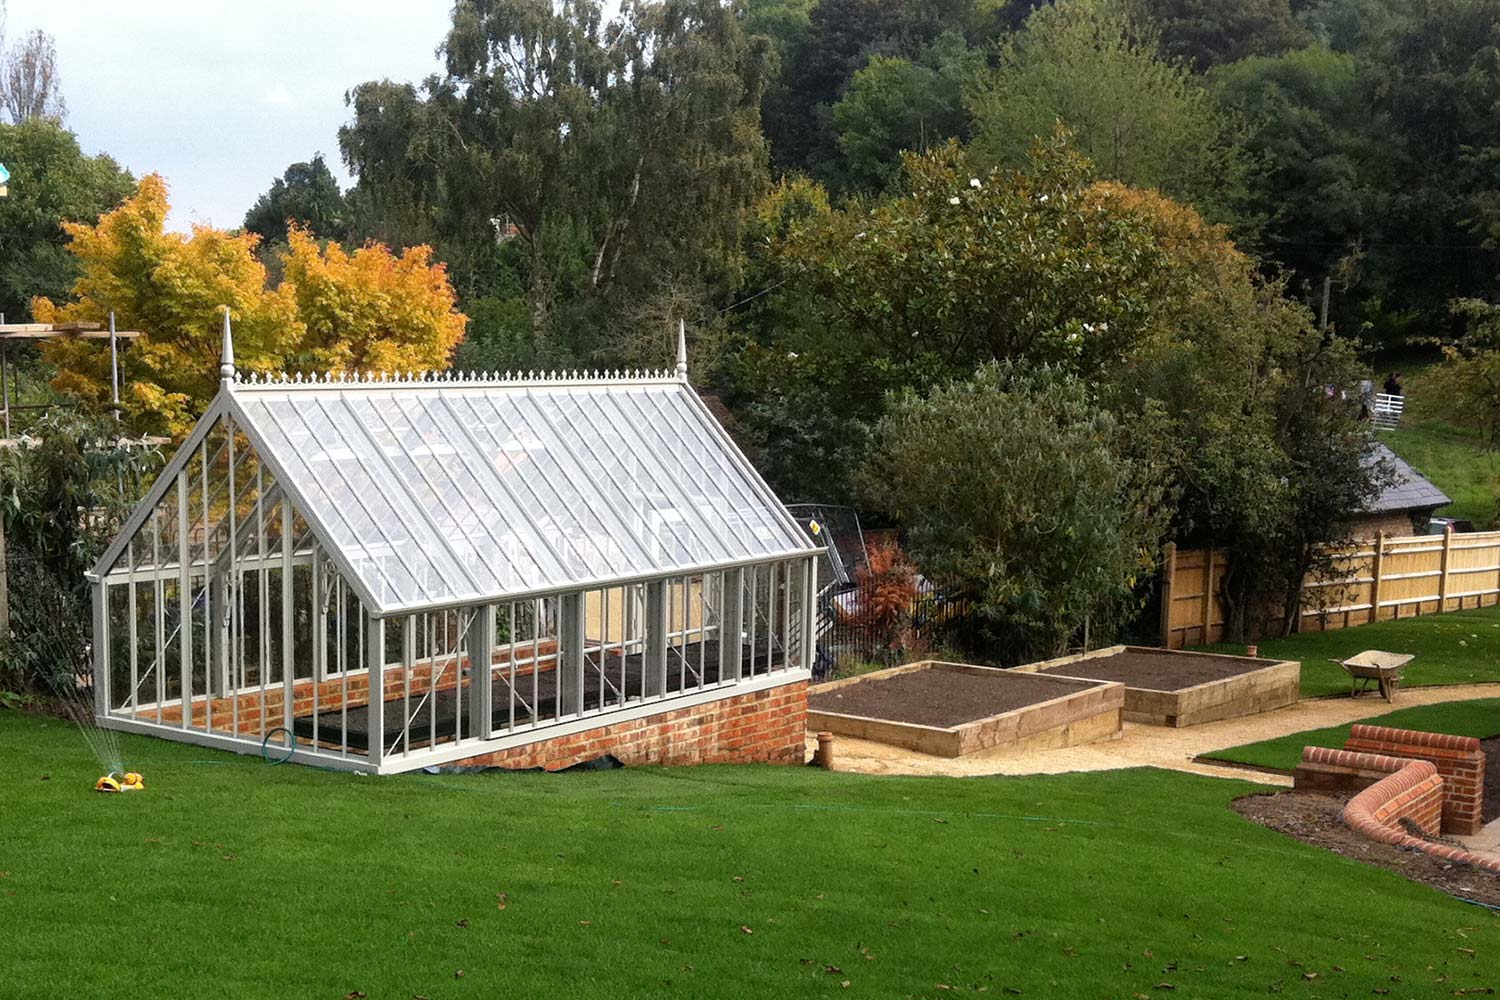 The Burton Greenhouse from the Alitex Kew Greenhouse Collection